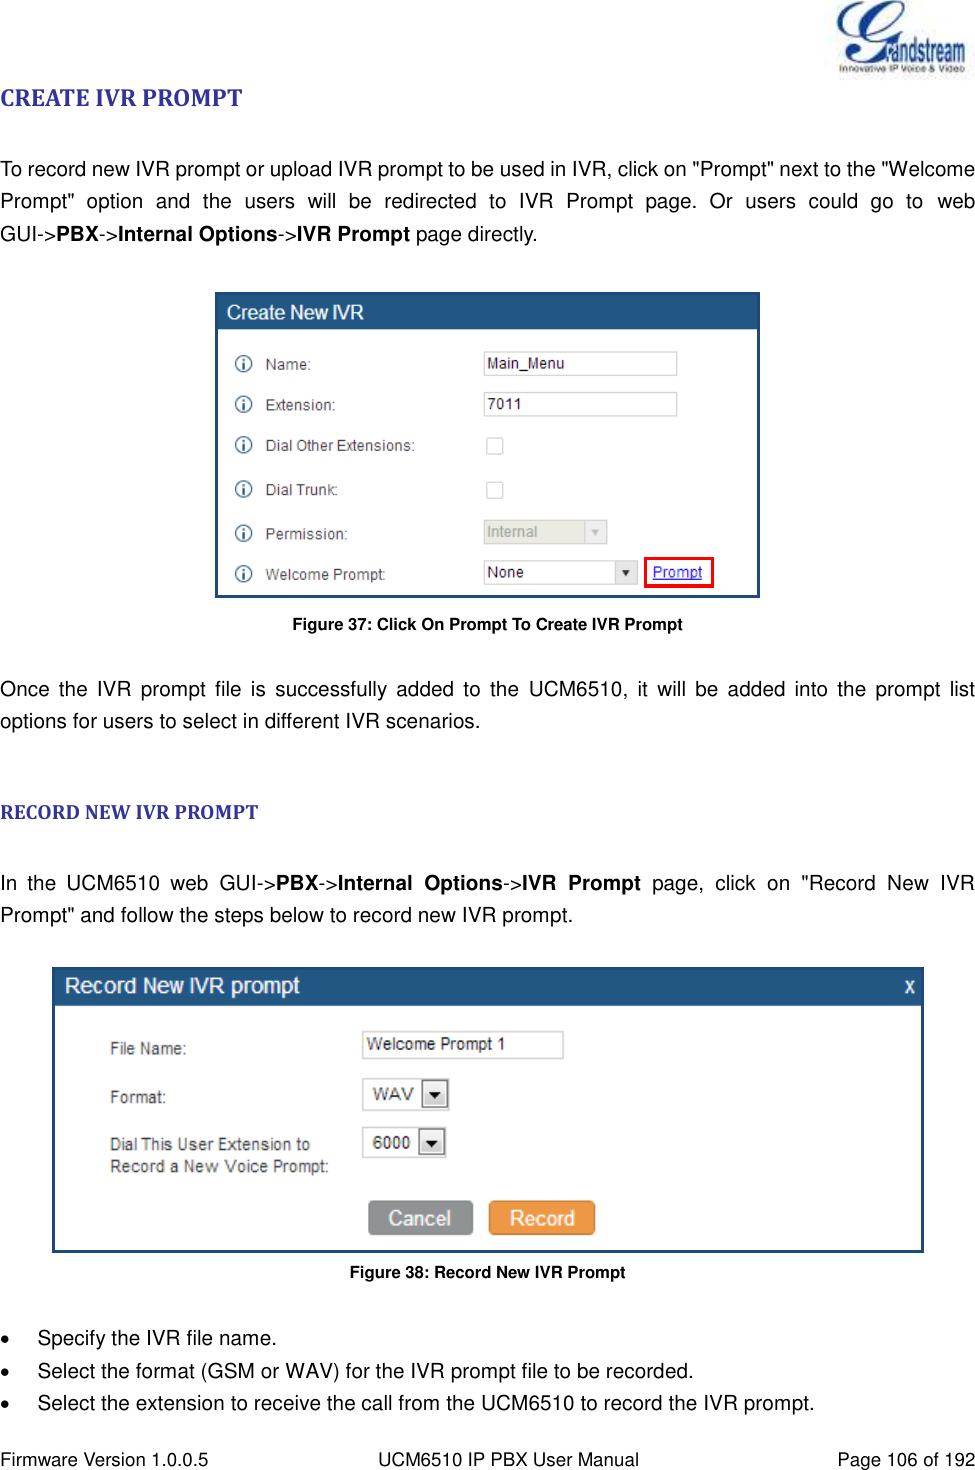  Firmware Version 1.0.0.5 UCM6510 IP PBX User Manual Page 106 of 192  CREATE IVR PROMPT  To record new IVR prompt or upload IVR prompt to be used in IVR, click on &quot;Prompt&quot; next to the &quot;Welcome Prompt&quot;  option  and  the  users  will  be  redirected  to  IVR  Prompt  page.  Or  users  could  go  to  web GUI-&gt;PBX-&gt;Internal Options-&gt;IVR Prompt page directly.   Figure 37: Click On Prompt To Create IVR Prompt  Once  the  IVR  prompt  file  is  successfully  added  to  the  UCM6510,  it  will  be  added  into  the  prompt  list options for users to select in different IVR scenarios.  RECORD NEW IVR PROMPT  In  the  UCM6510  web  GUI-&gt;PBX-&gt;Internal  Options-&gt;IVR  Prompt  page,  click  on  &quot;Record  New  IVR Prompt&quot; and follow the steps below to record new IVR prompt.   Figure 38: Record New IVR Prompt    Specify the IVR file name.   Select the format (GSM or WAV) for the IVR prompt file to be recorded.   Select the extension to receive the call from the UCM6510 to record the IVR prompt. 